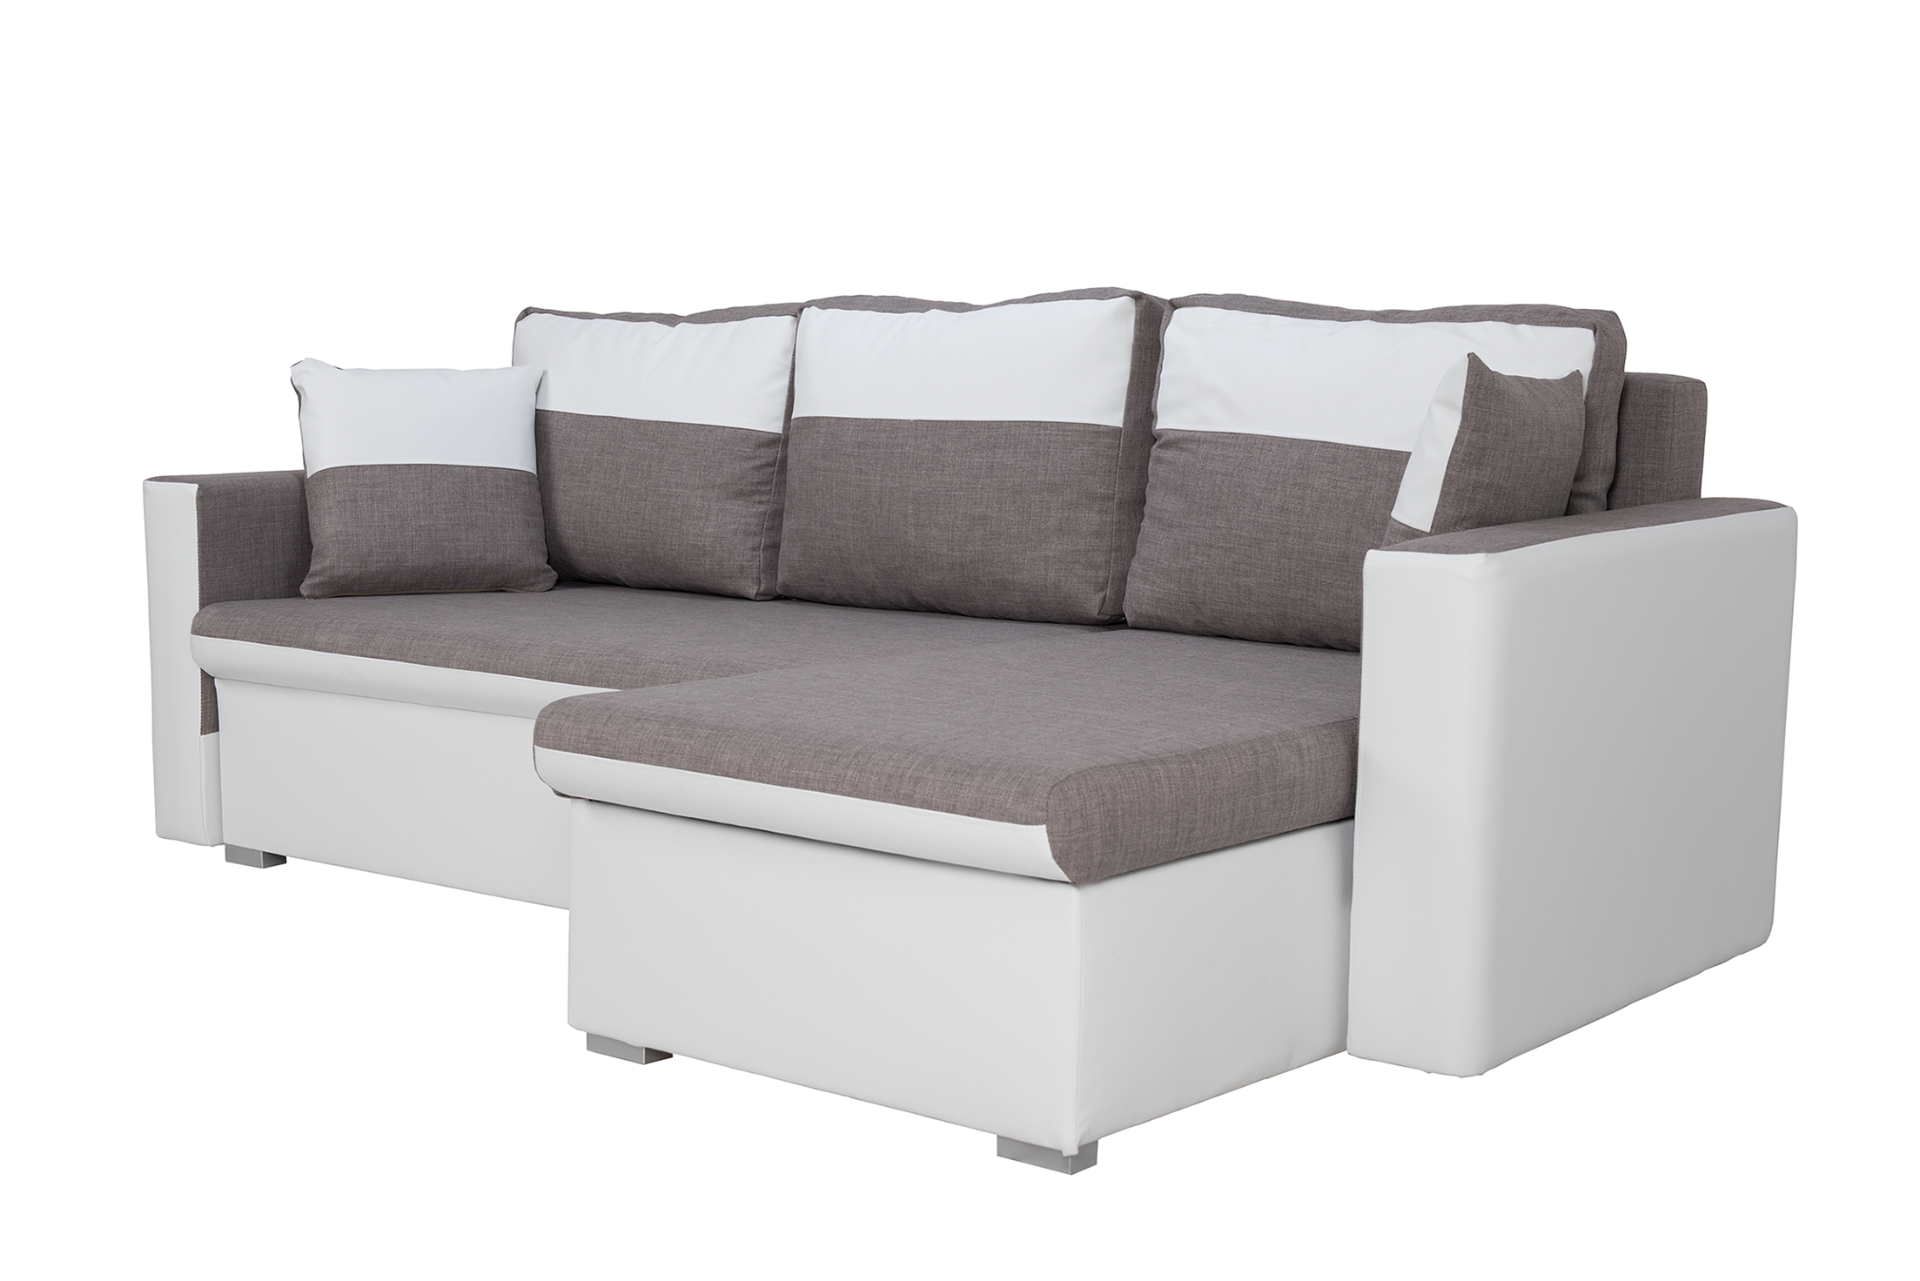 Flˆvio corner sofa bed right hand facing in white and grey faux leather - Image 3 of 3